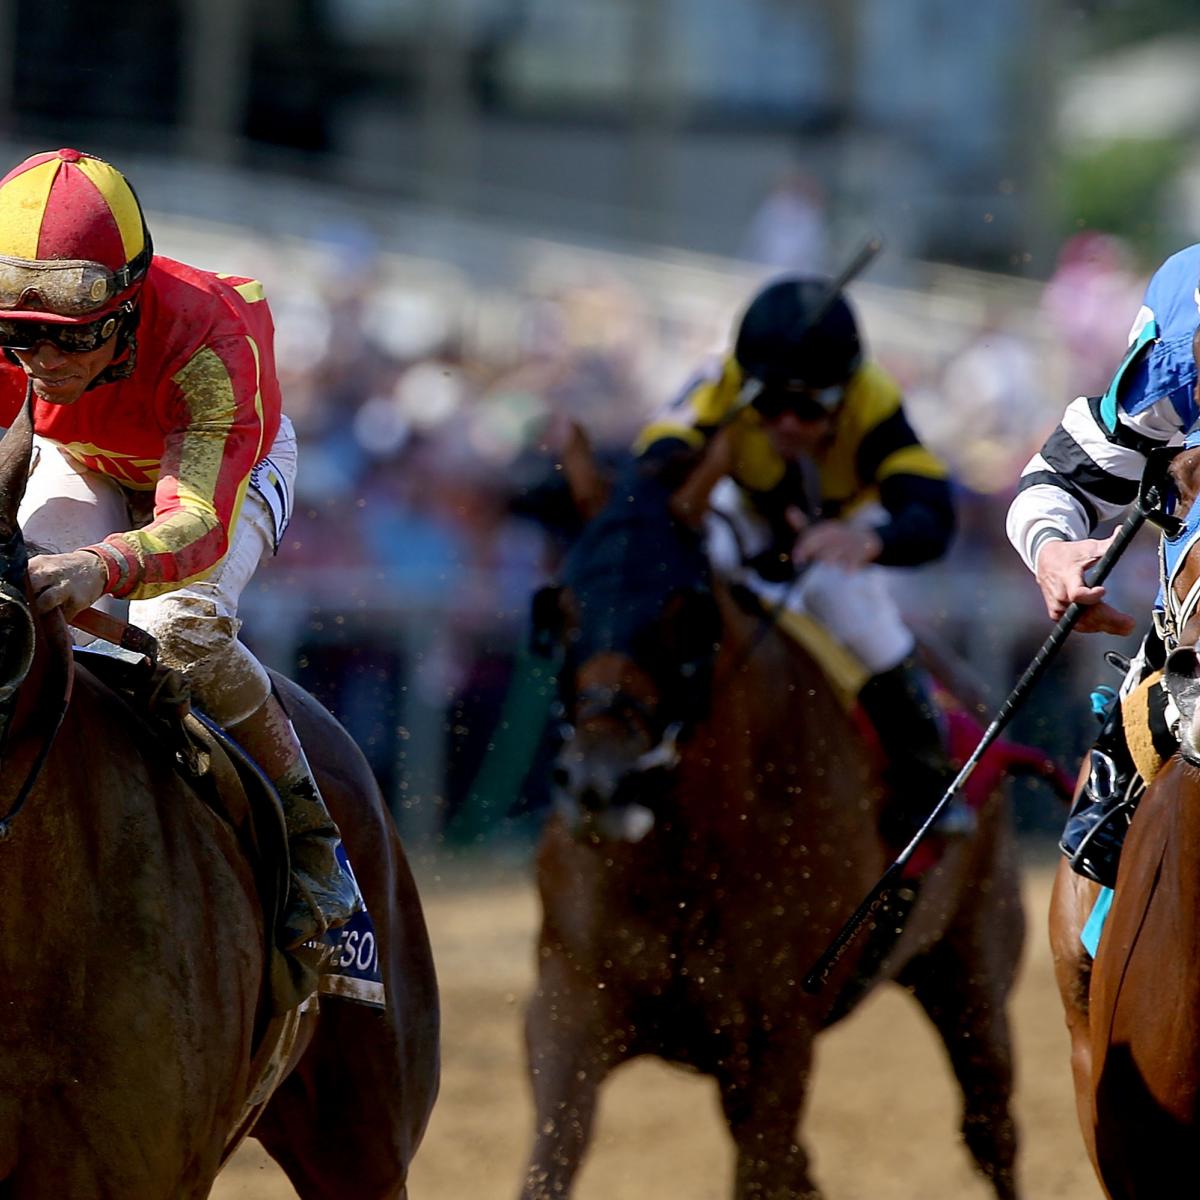 Preakness Start Time When to Watch Top Sprinters in This Year's Field